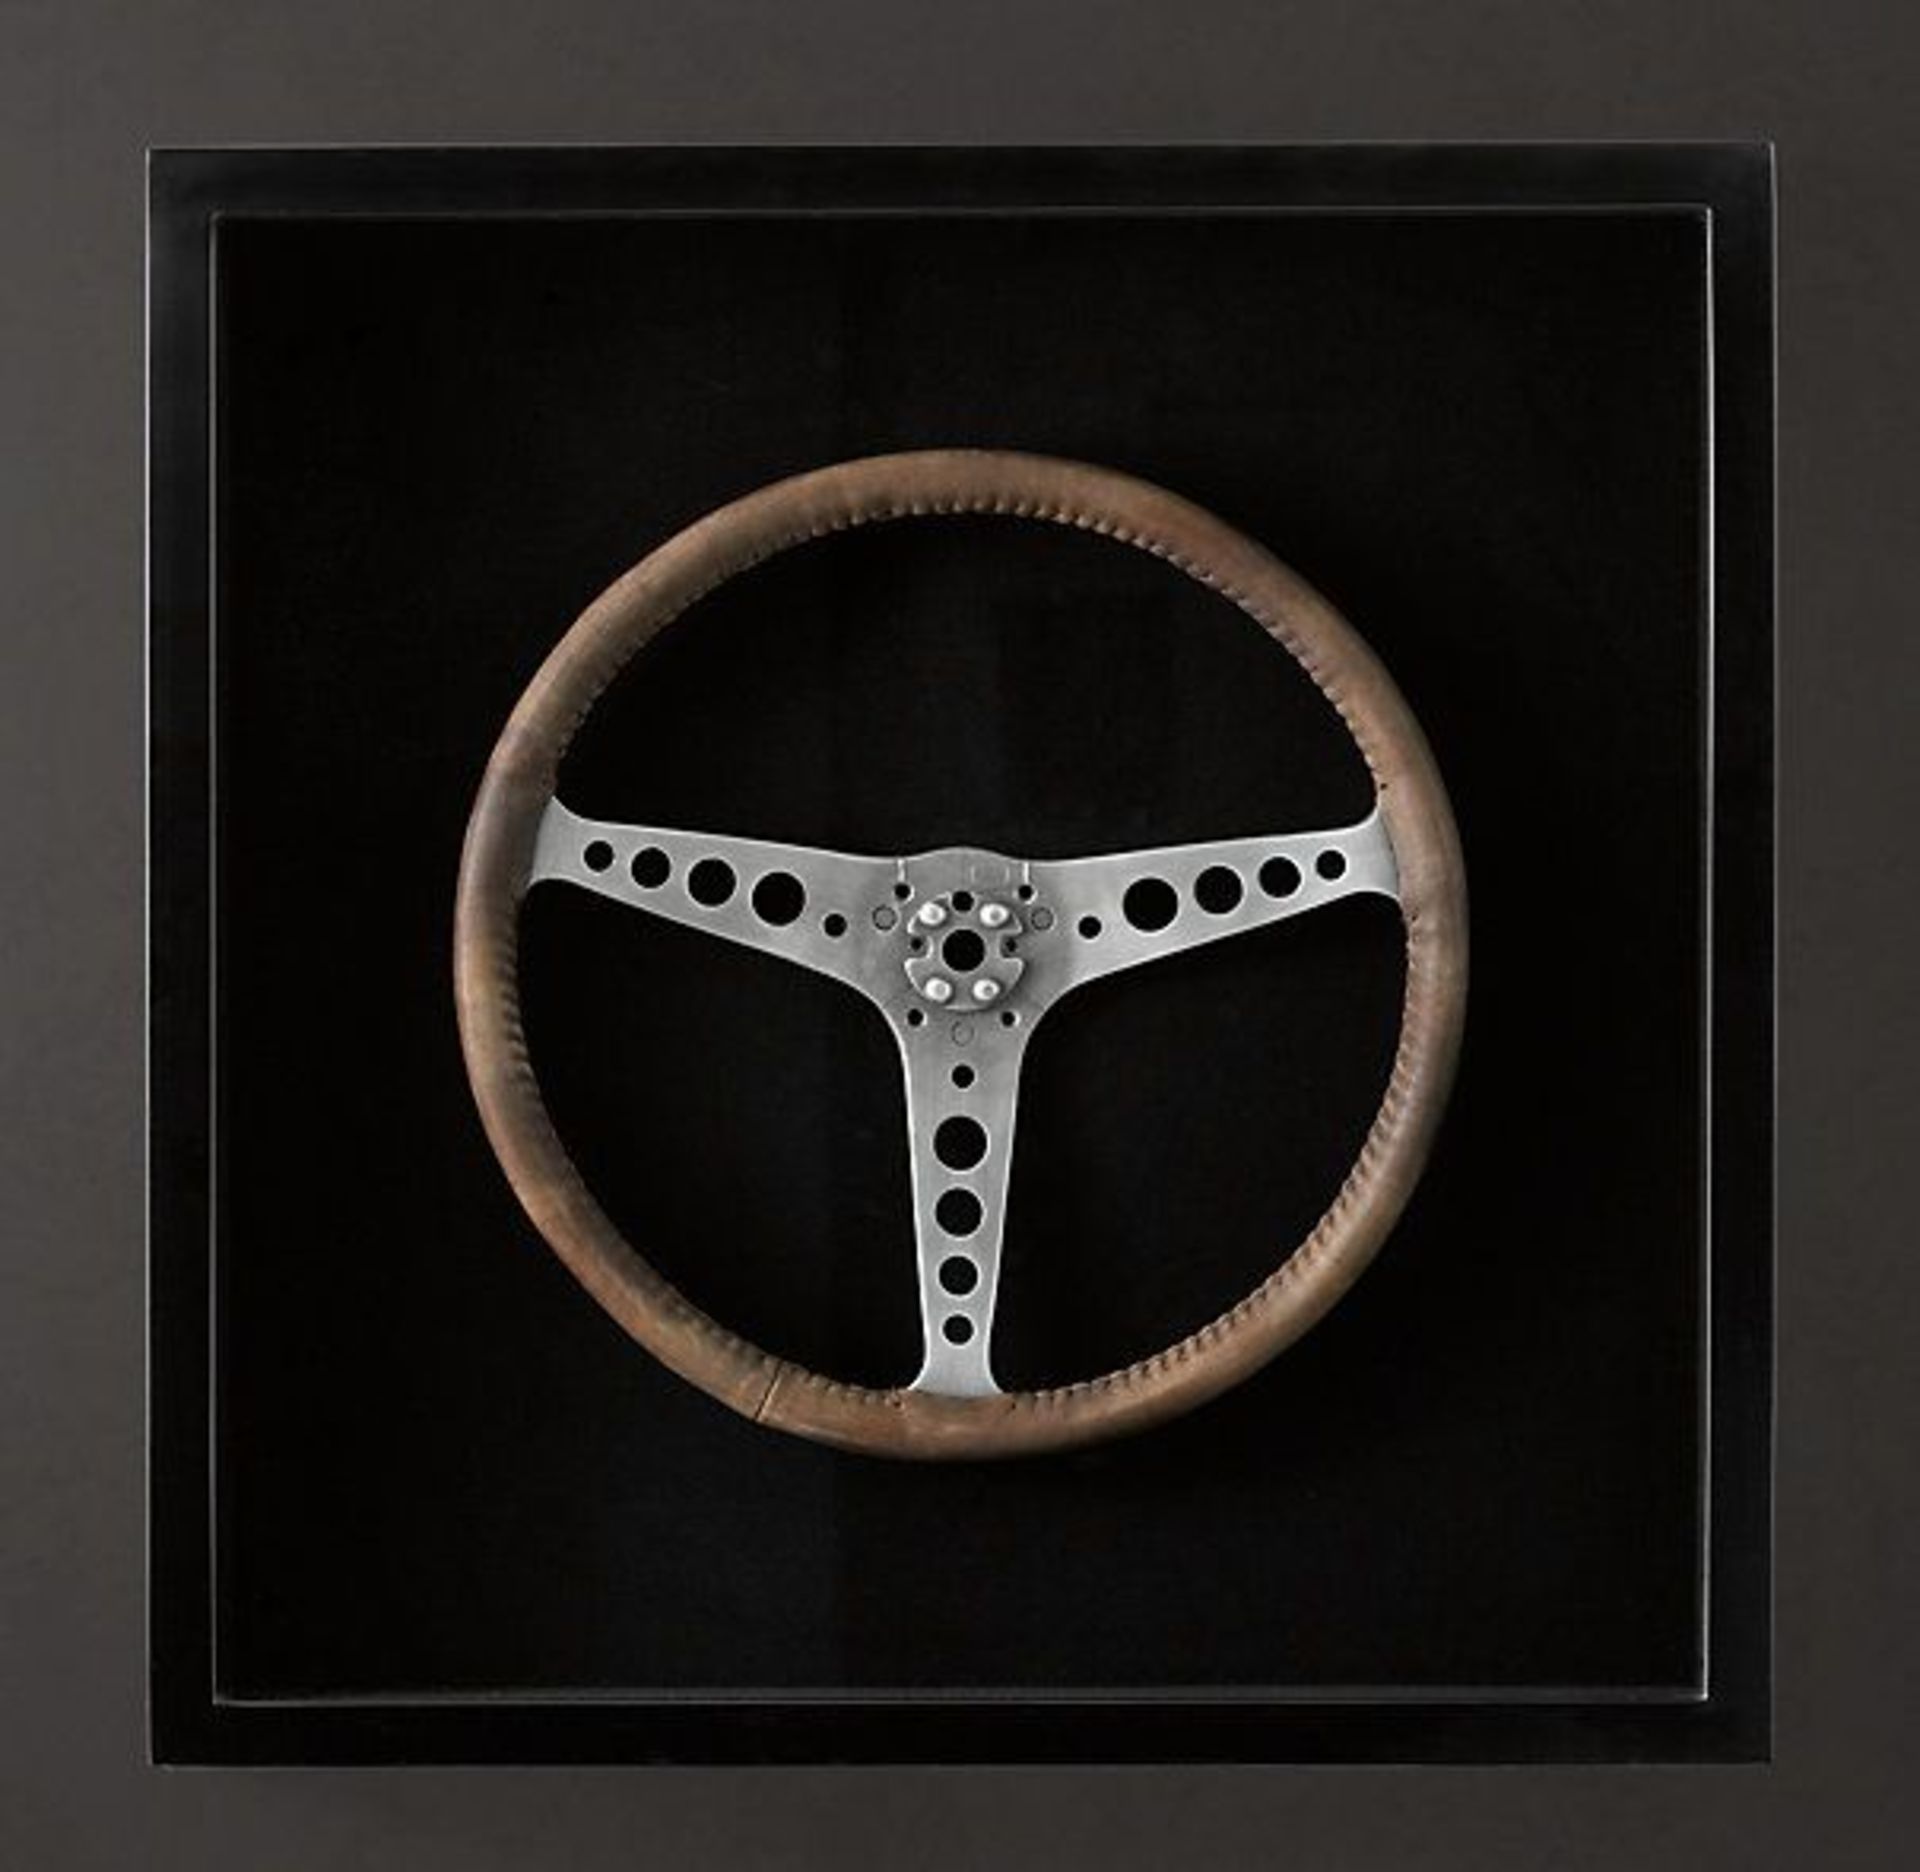 Leather Steering Wheel Shadow Box Our Shadow Box Collection Features Exact Replicas Of Vintage